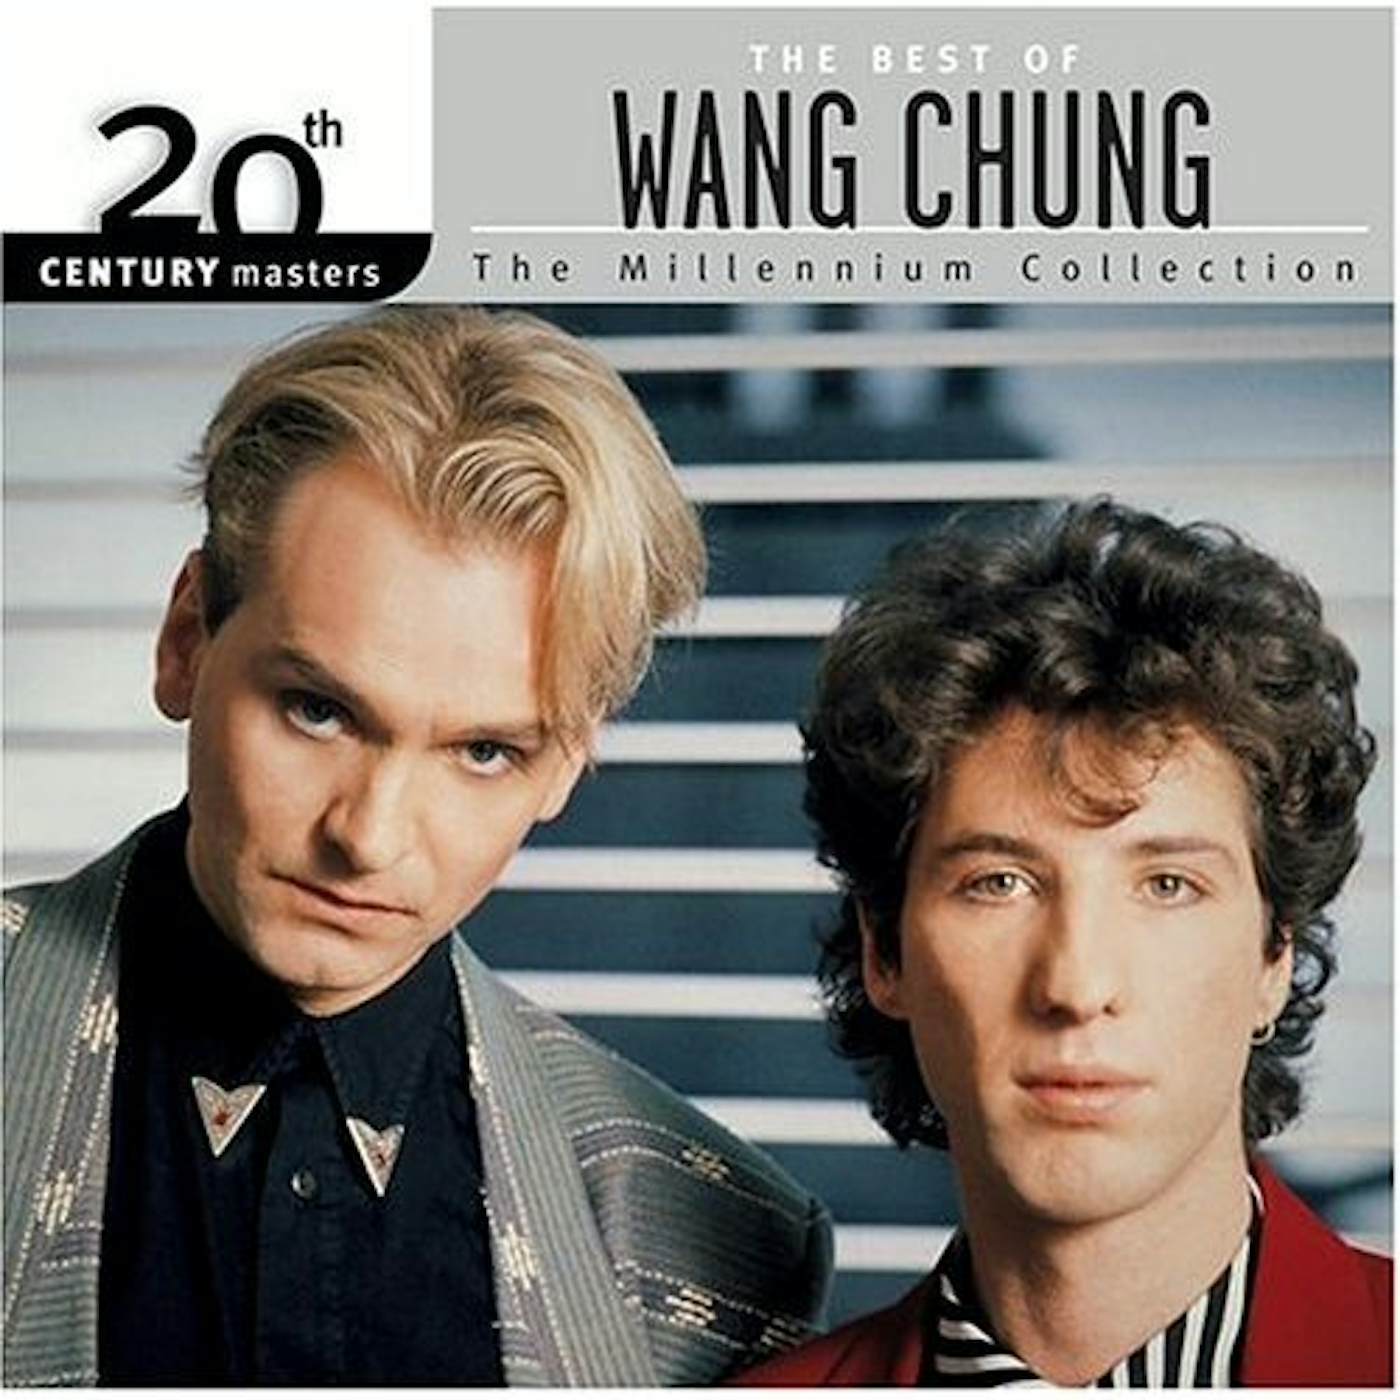 Wang Chung 20TH CENTURY MASTERS: MILLENNIUM COLLECTION CD